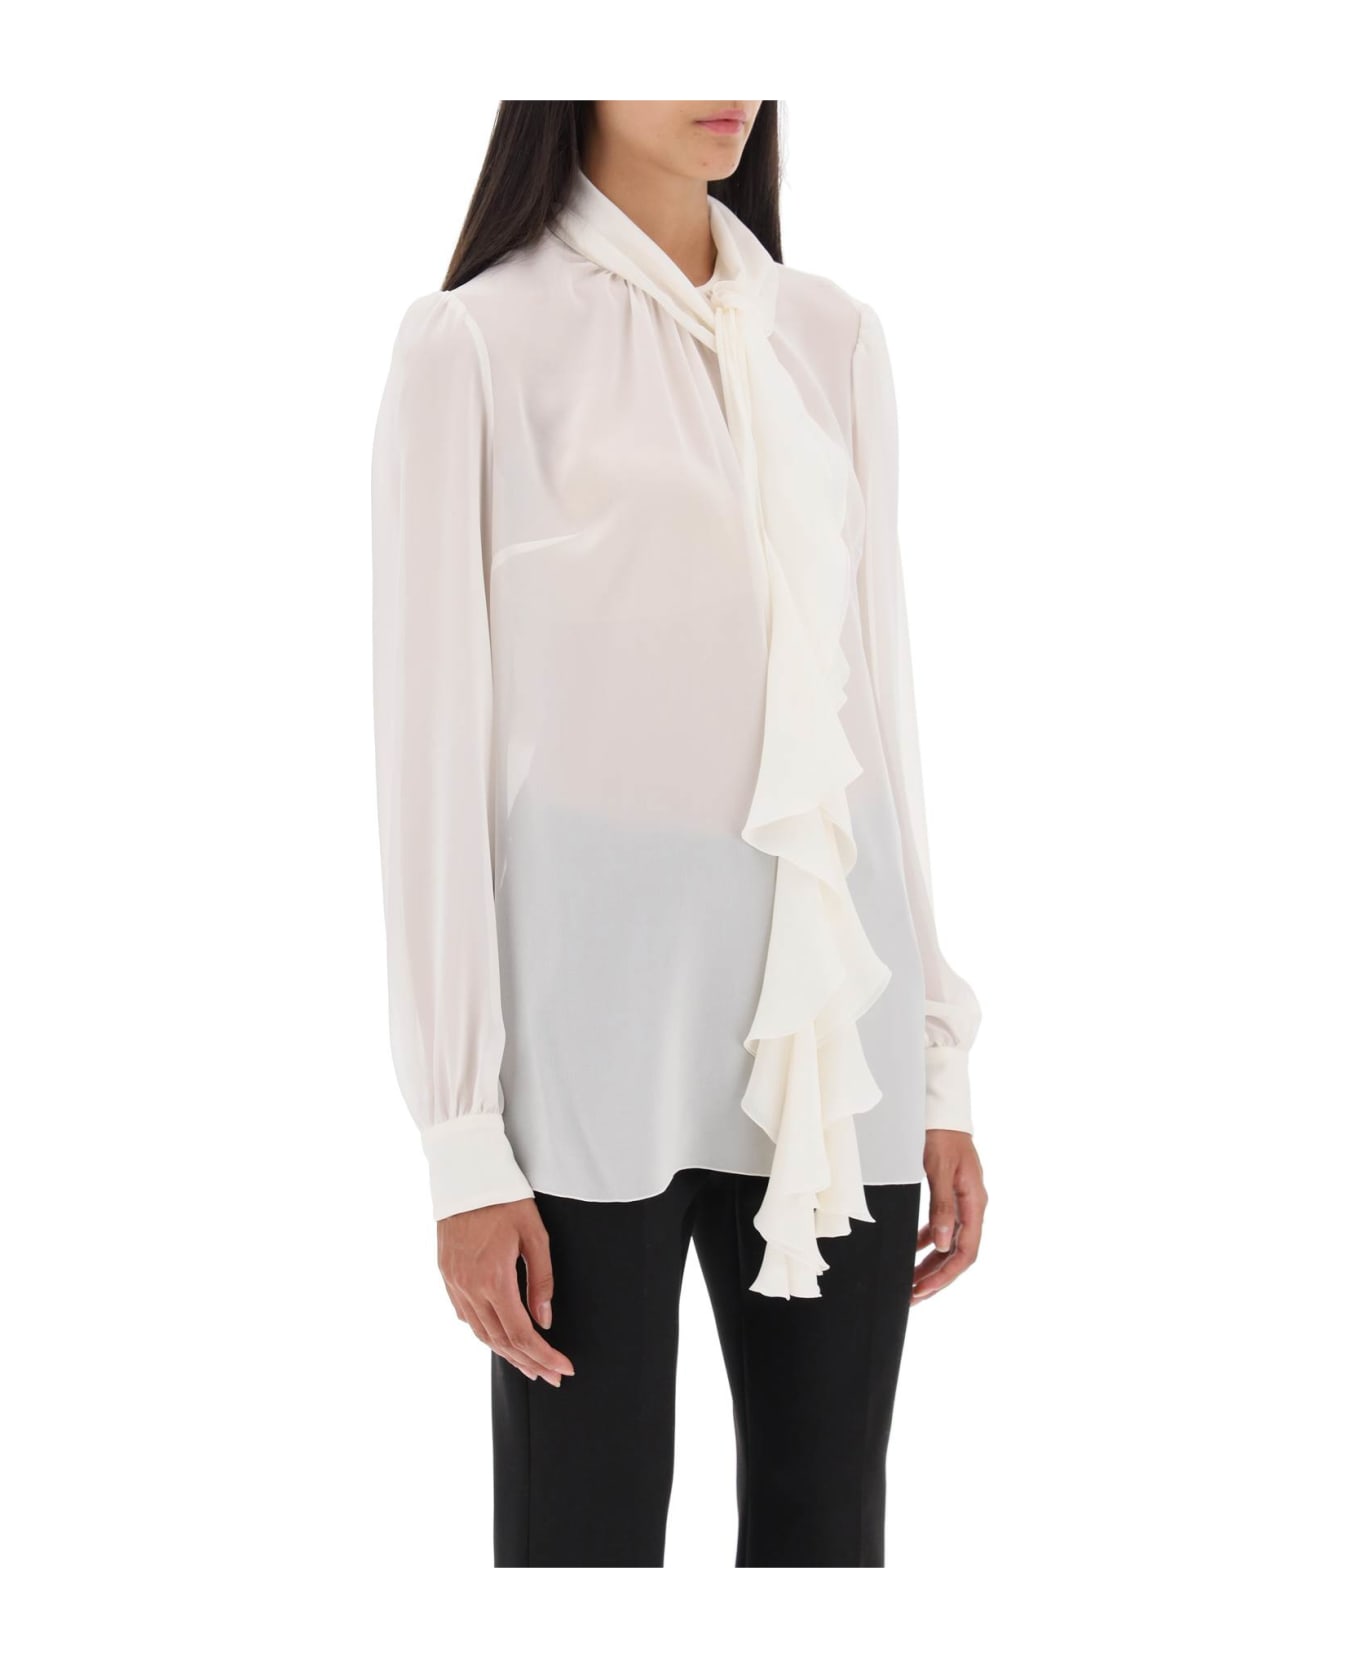 Dolce & Gabbana Silk-georgette Blouse With Ruffles - BIANCO NATURALE (White) ブラウス